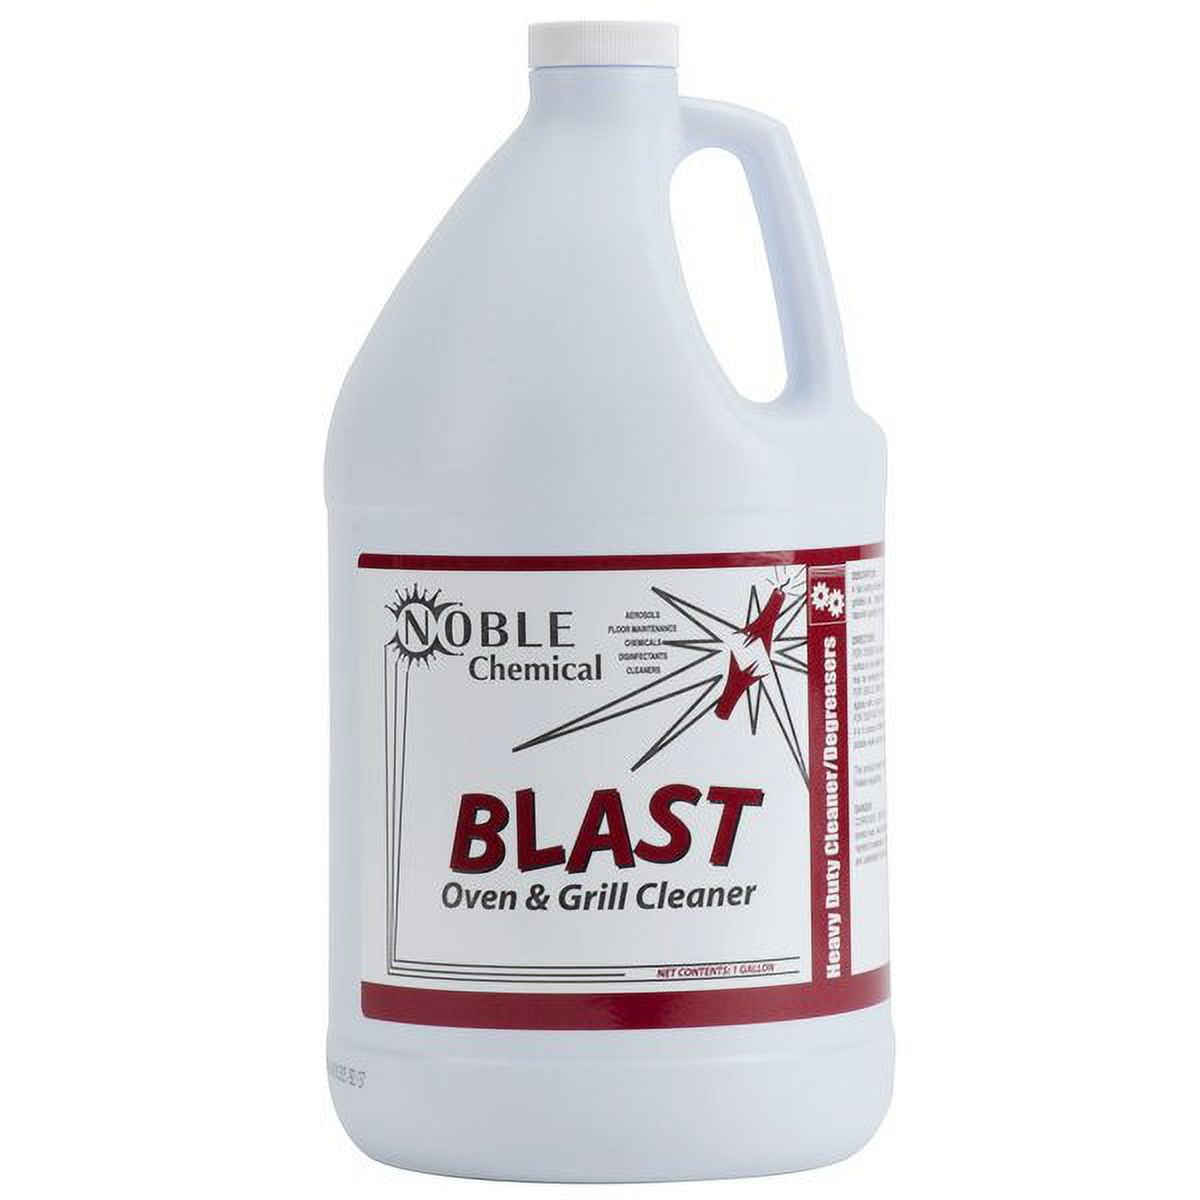 Noble Chemical Blast 1 qt. / 32 oz. Ready-to-Use Liquid Oven